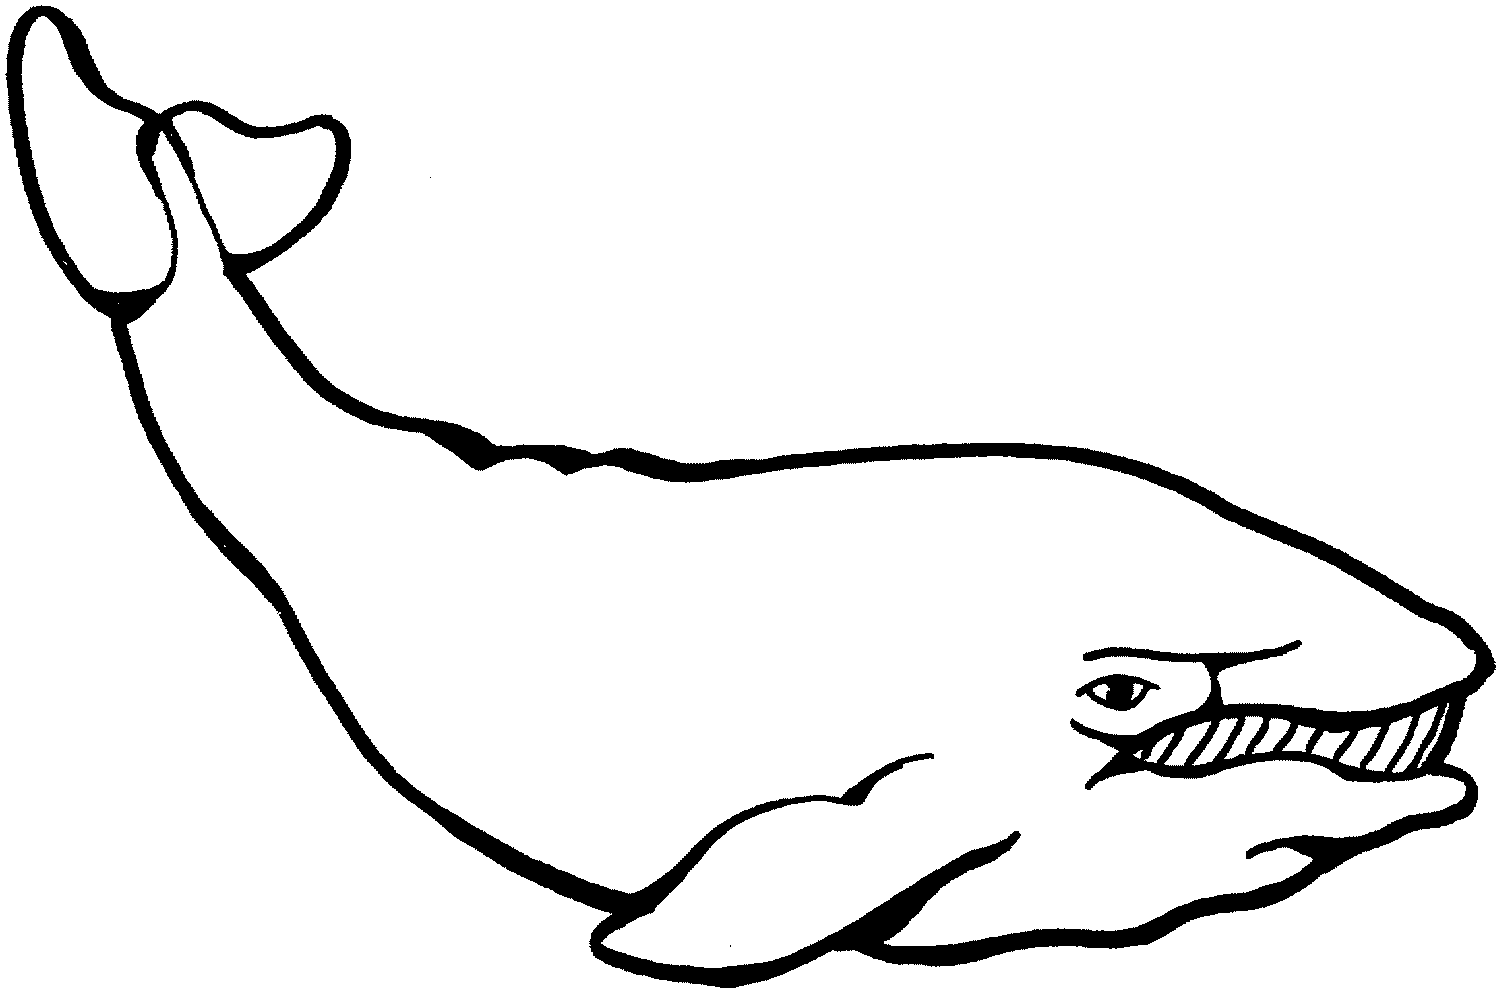 17 Whale Line Drawing Free Cliparts That You Can Download To You    